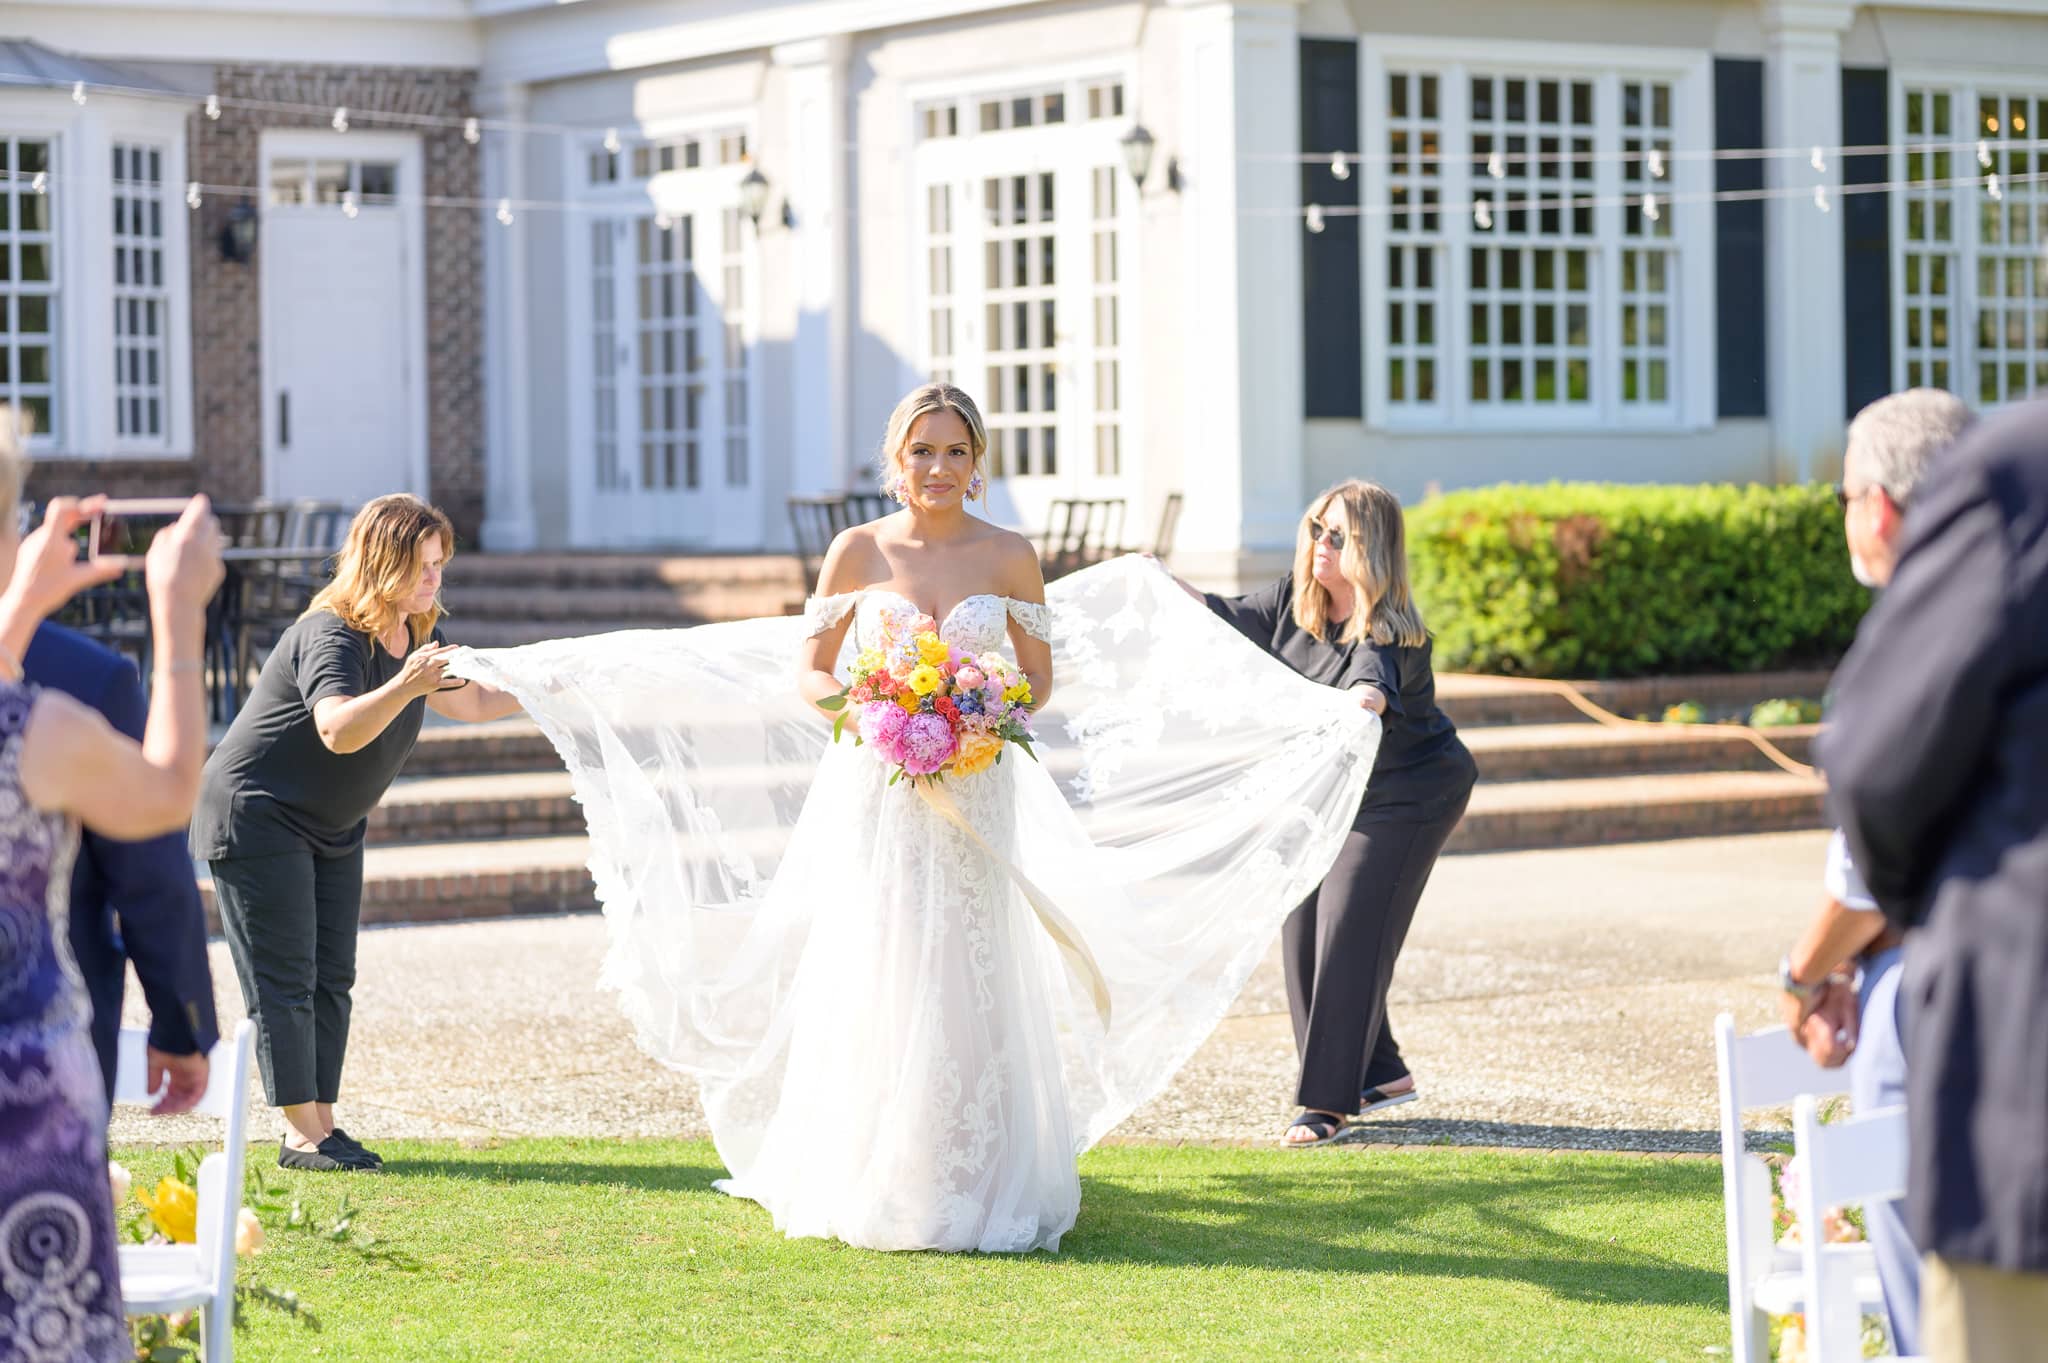 Fluffing the bride's dress - Pawleys Plantation Golf & Country Club